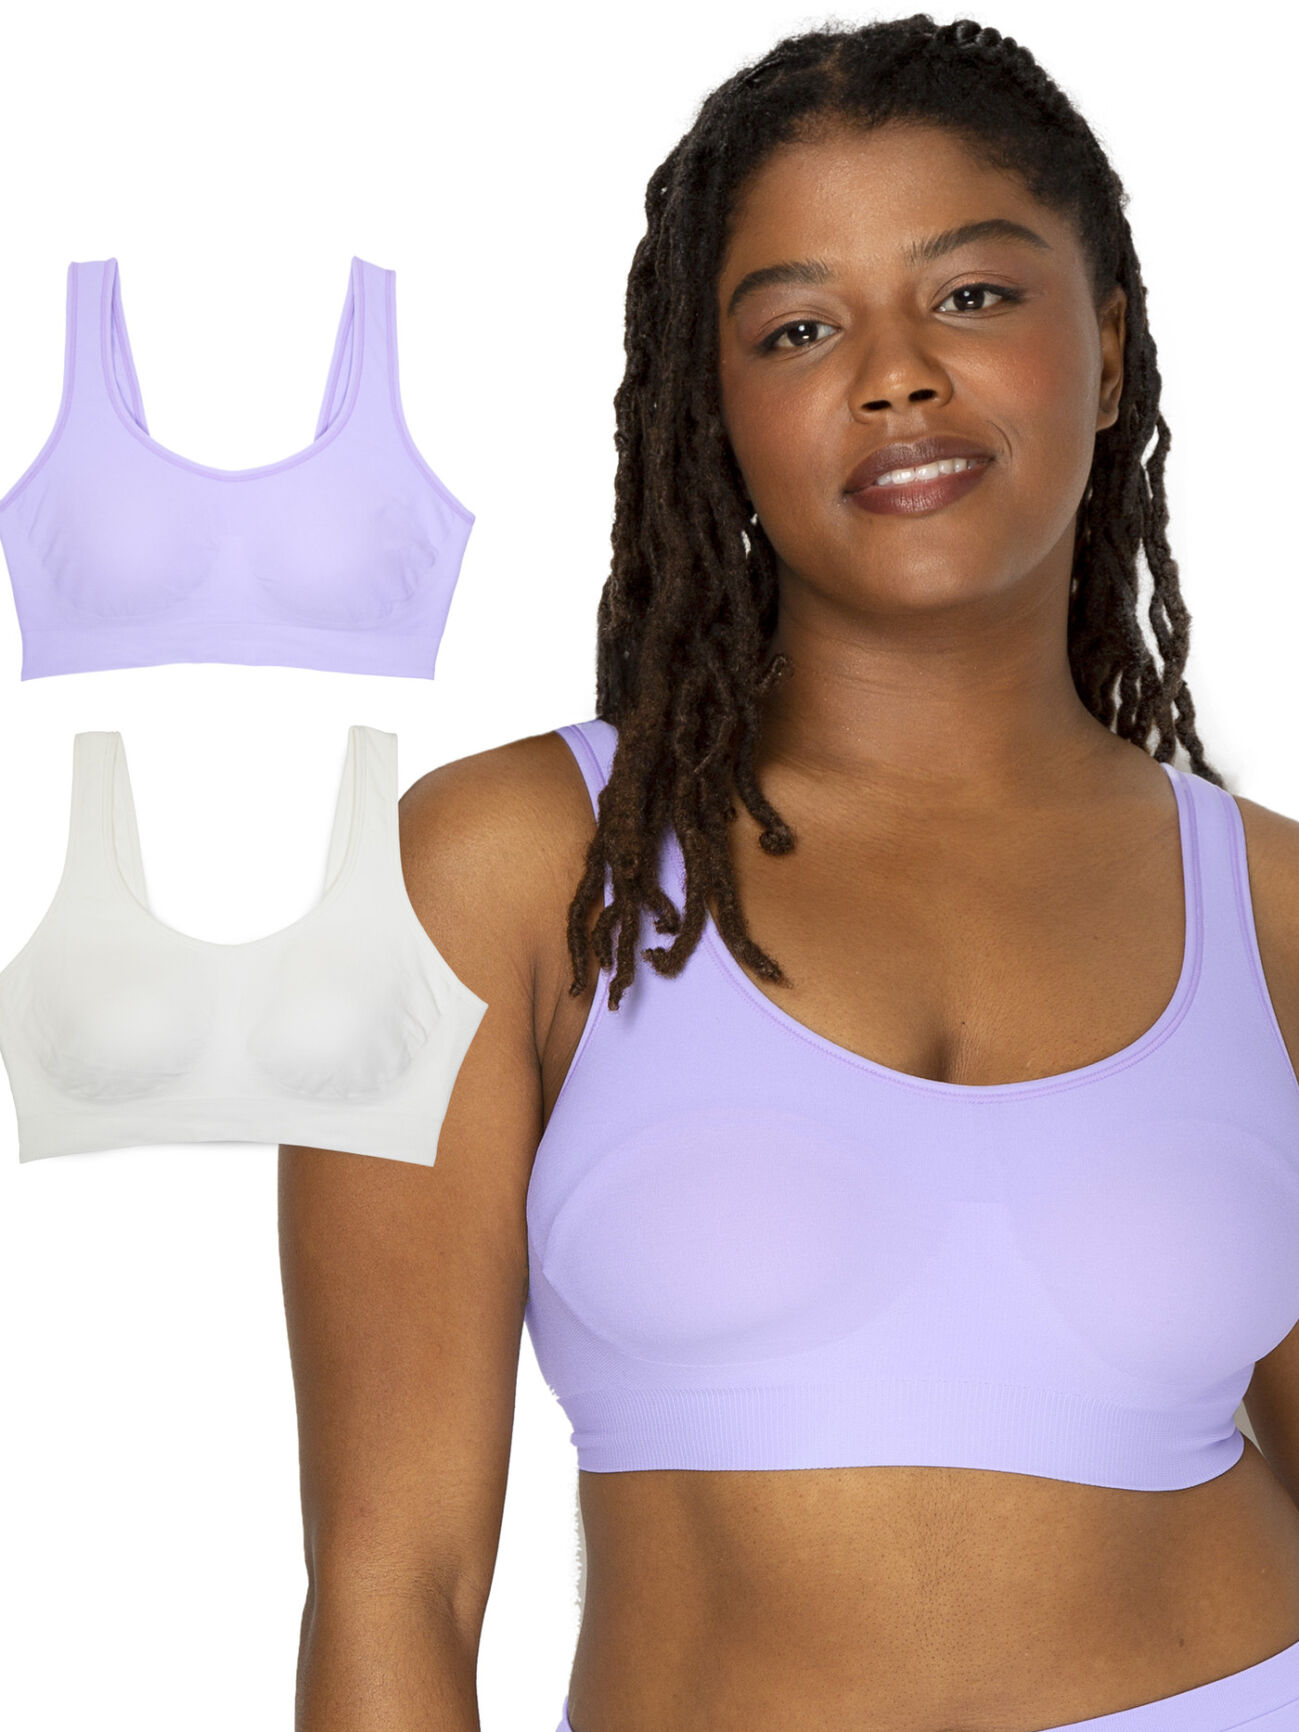 White Bralette Bras for Women Wirefree Tank Tops with Built in